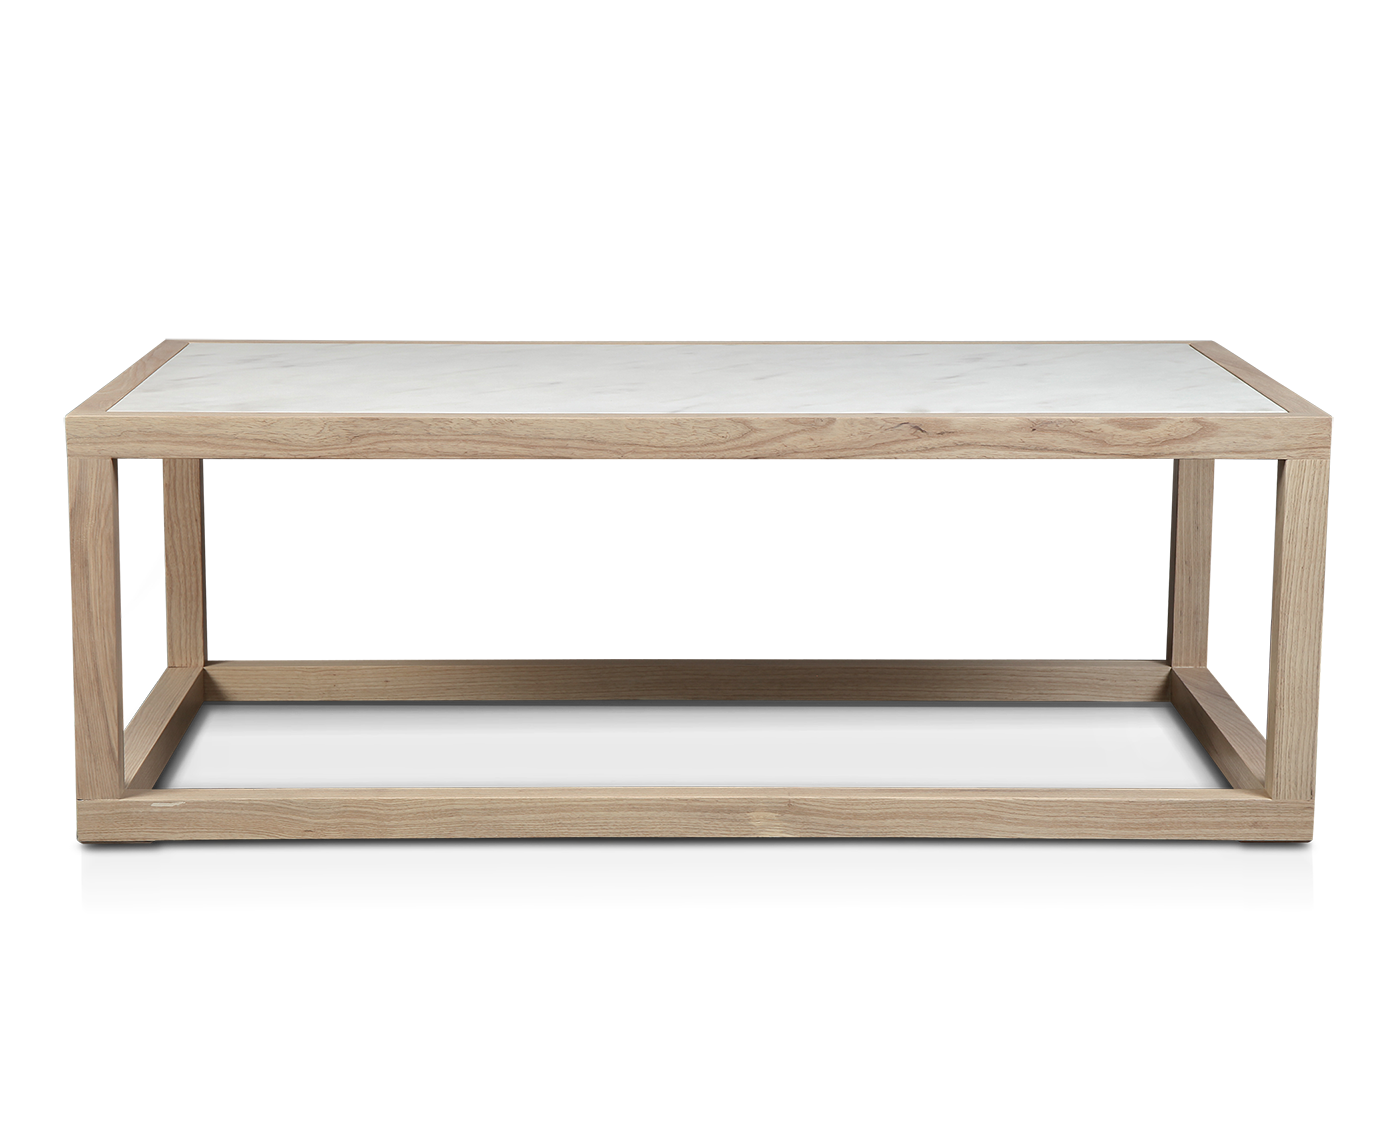 blog_Daintree_Coffee_Table_White_Marble_Top_3 copy.png